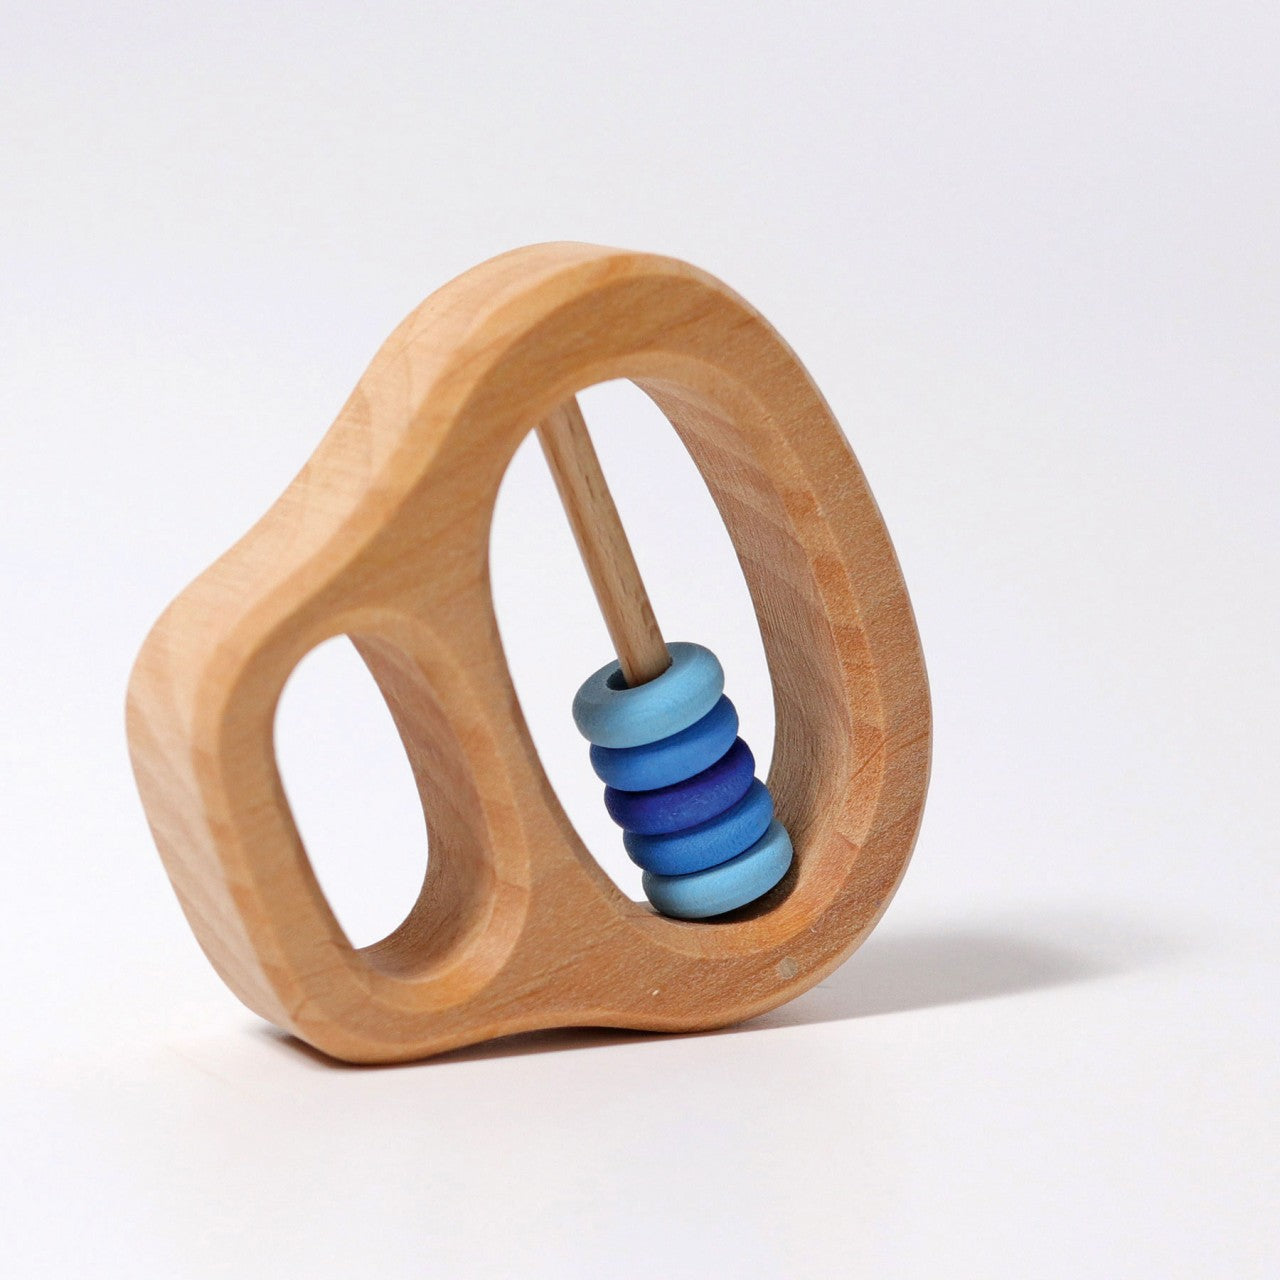 5 Blue Rings Rattle & Clutching Toy | Baby’s First Wooden Toy